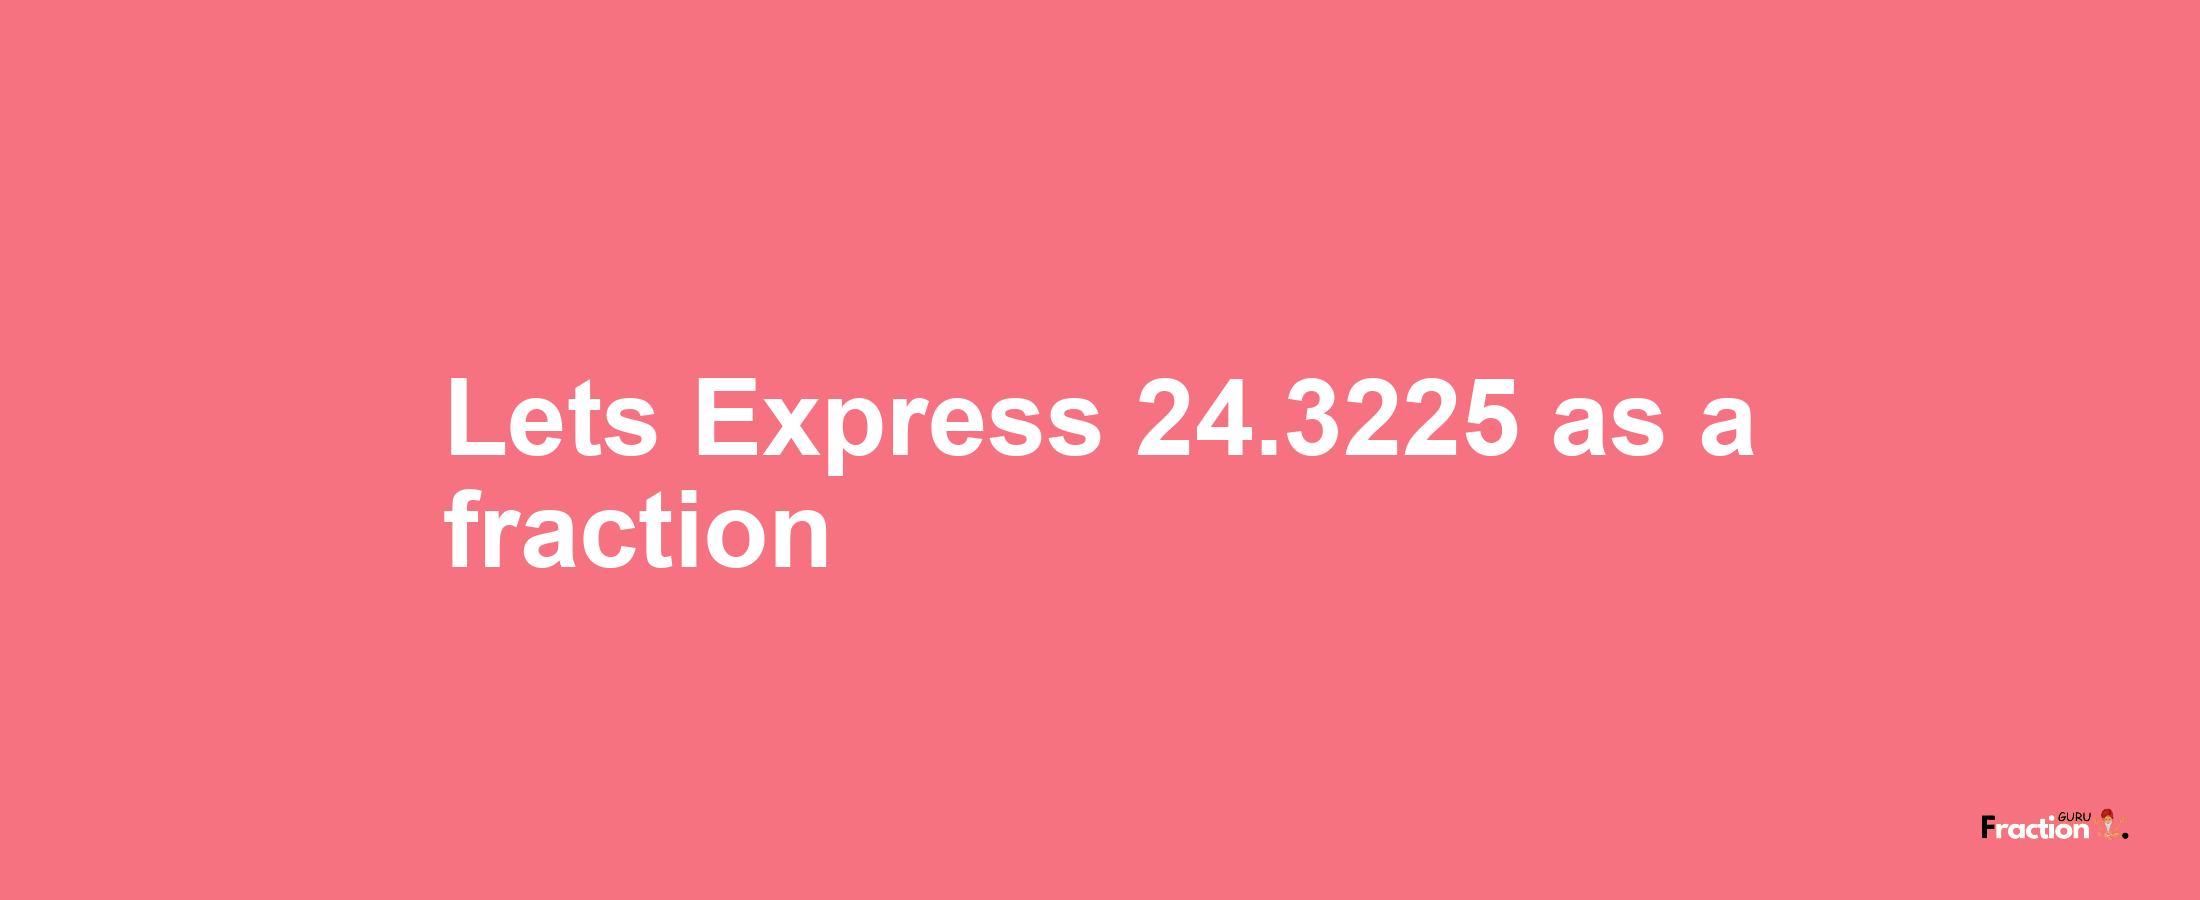 Lets Express 24.3225 as afraction